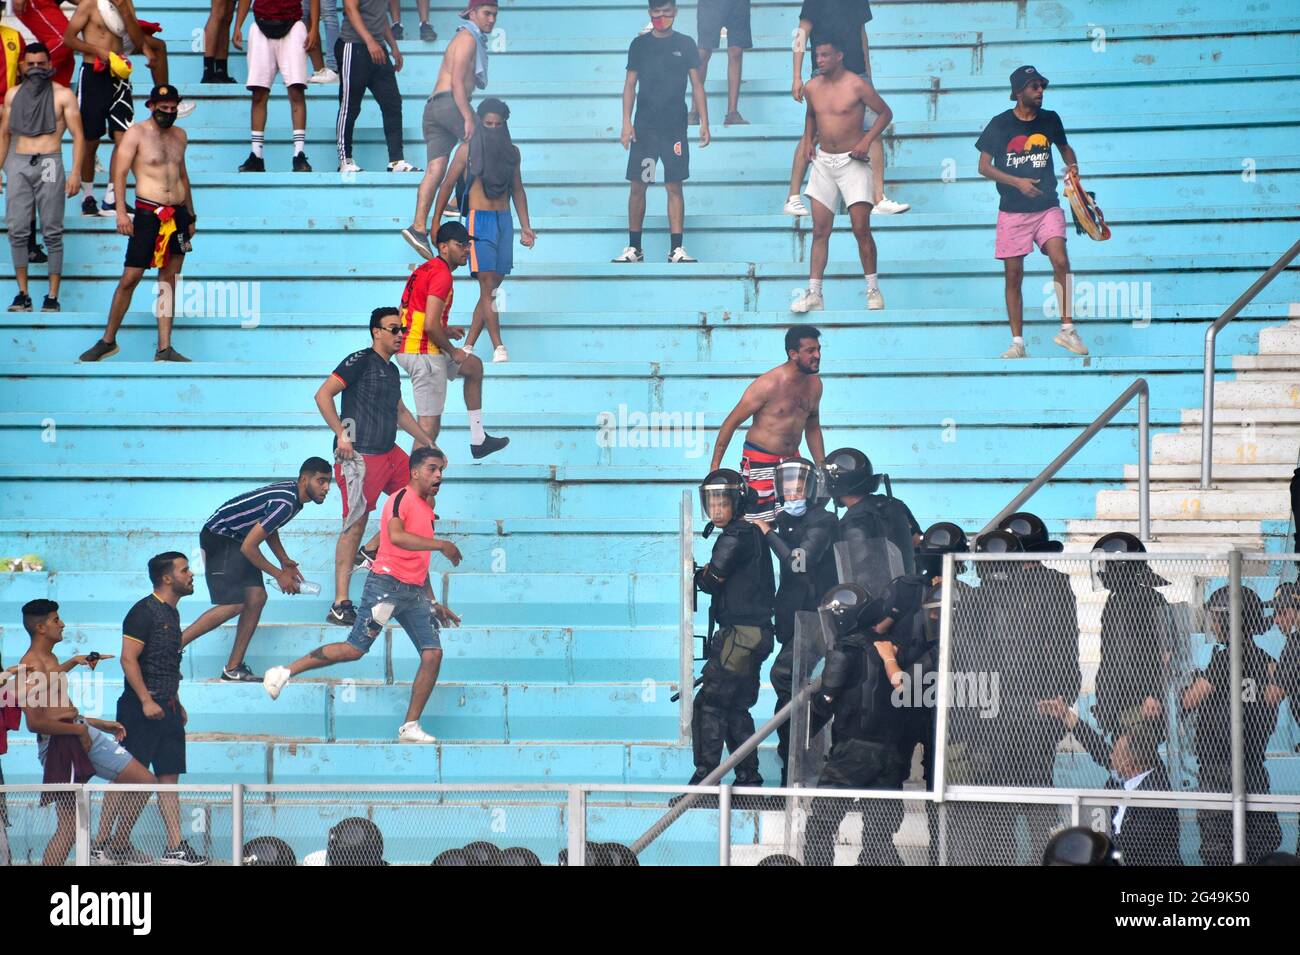 Tunis, Tunisia. 19th June, 2021. Clashes between supporters of Esperance  Sportive de Tunis and the police during the first leg CAF champions league  semi-final football match between Tunisia's Esperance Sportive de Tunis